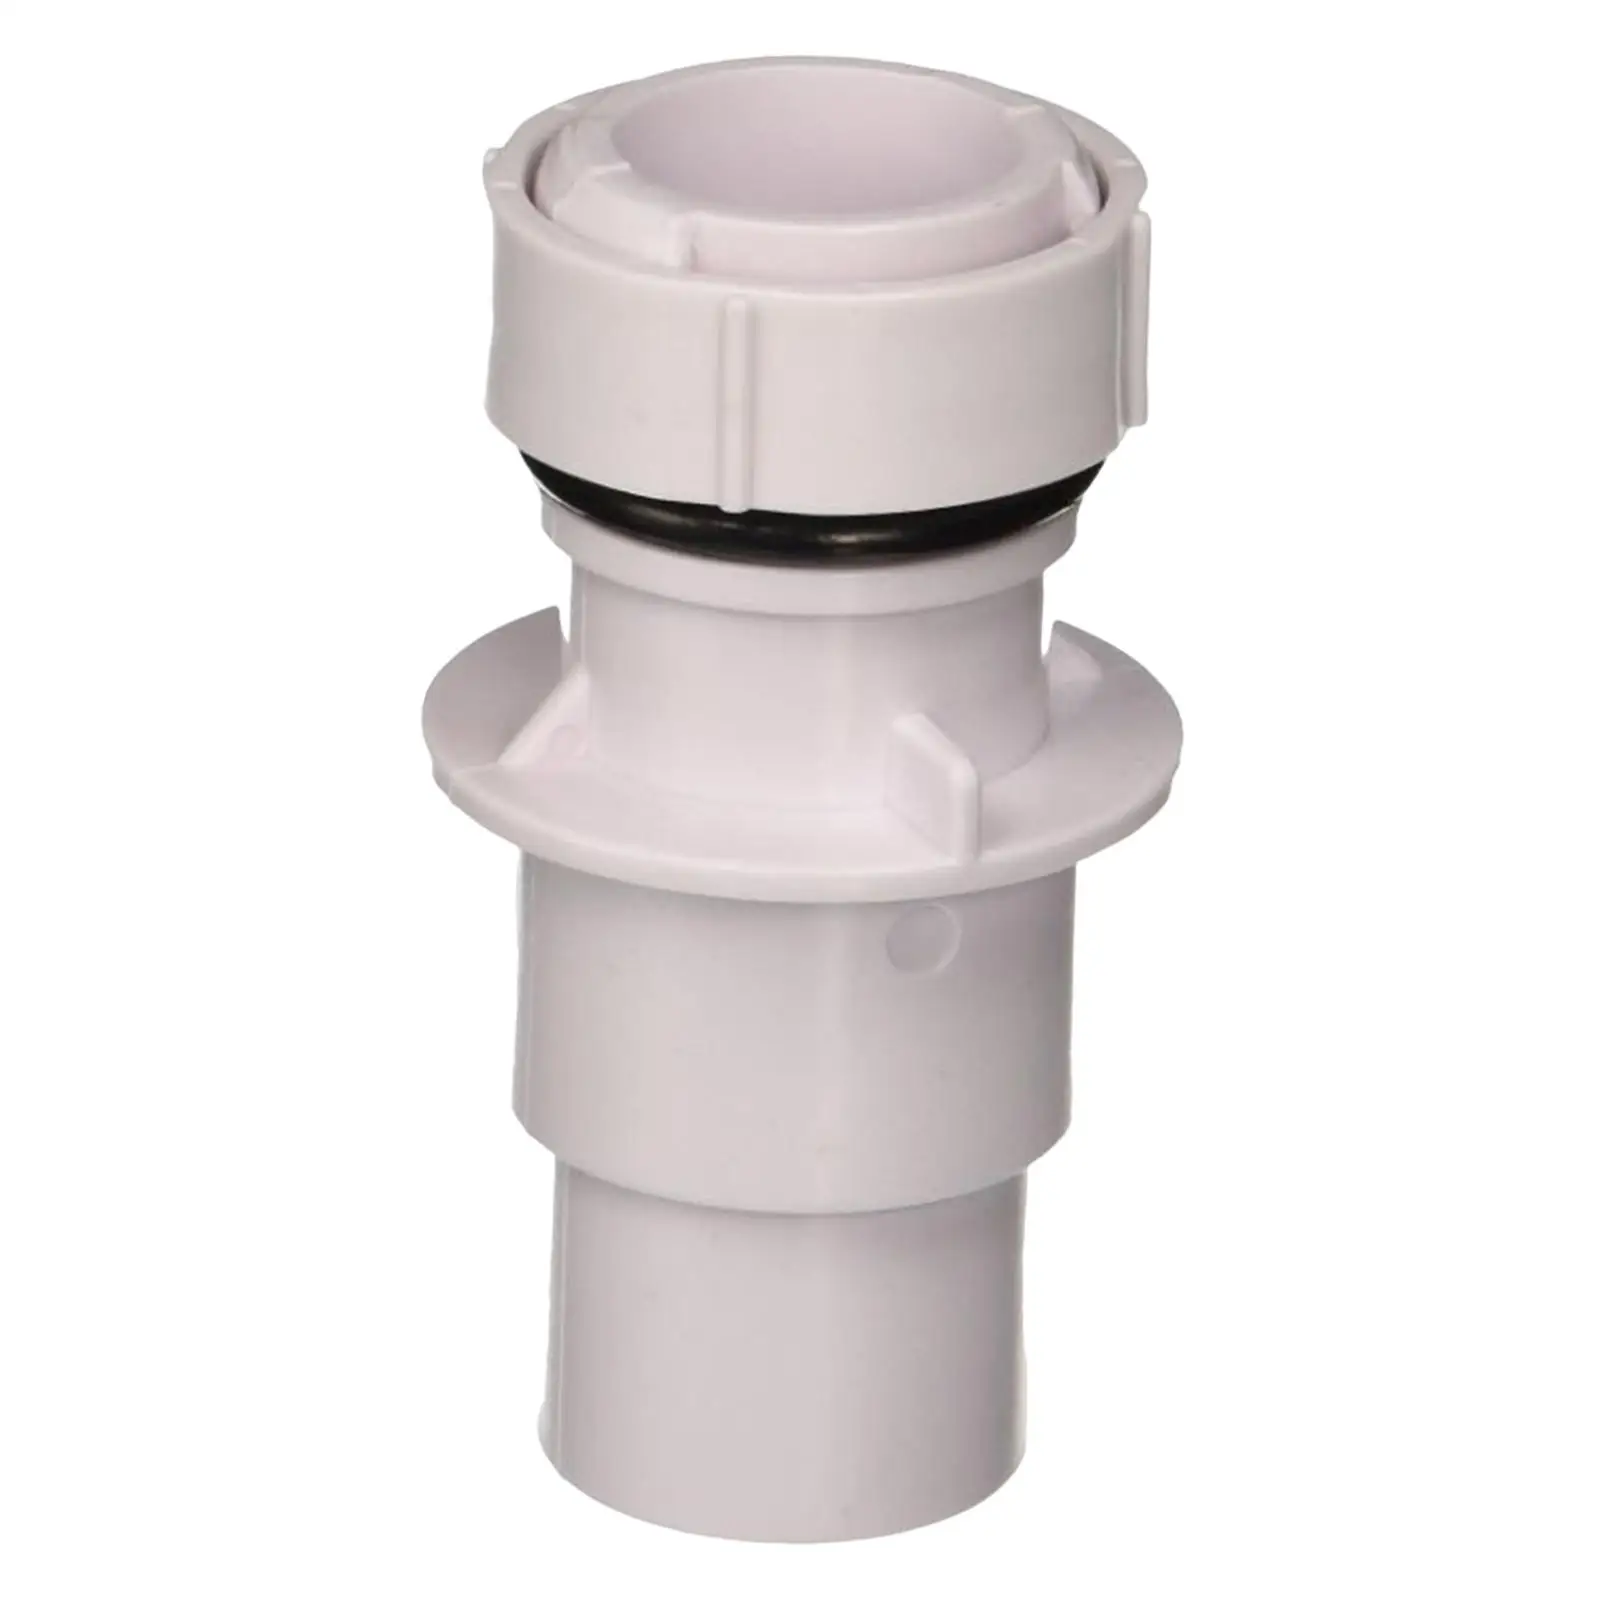 Replacement above Ground Pool Hose Connector for Skimmer Plumbing Connection